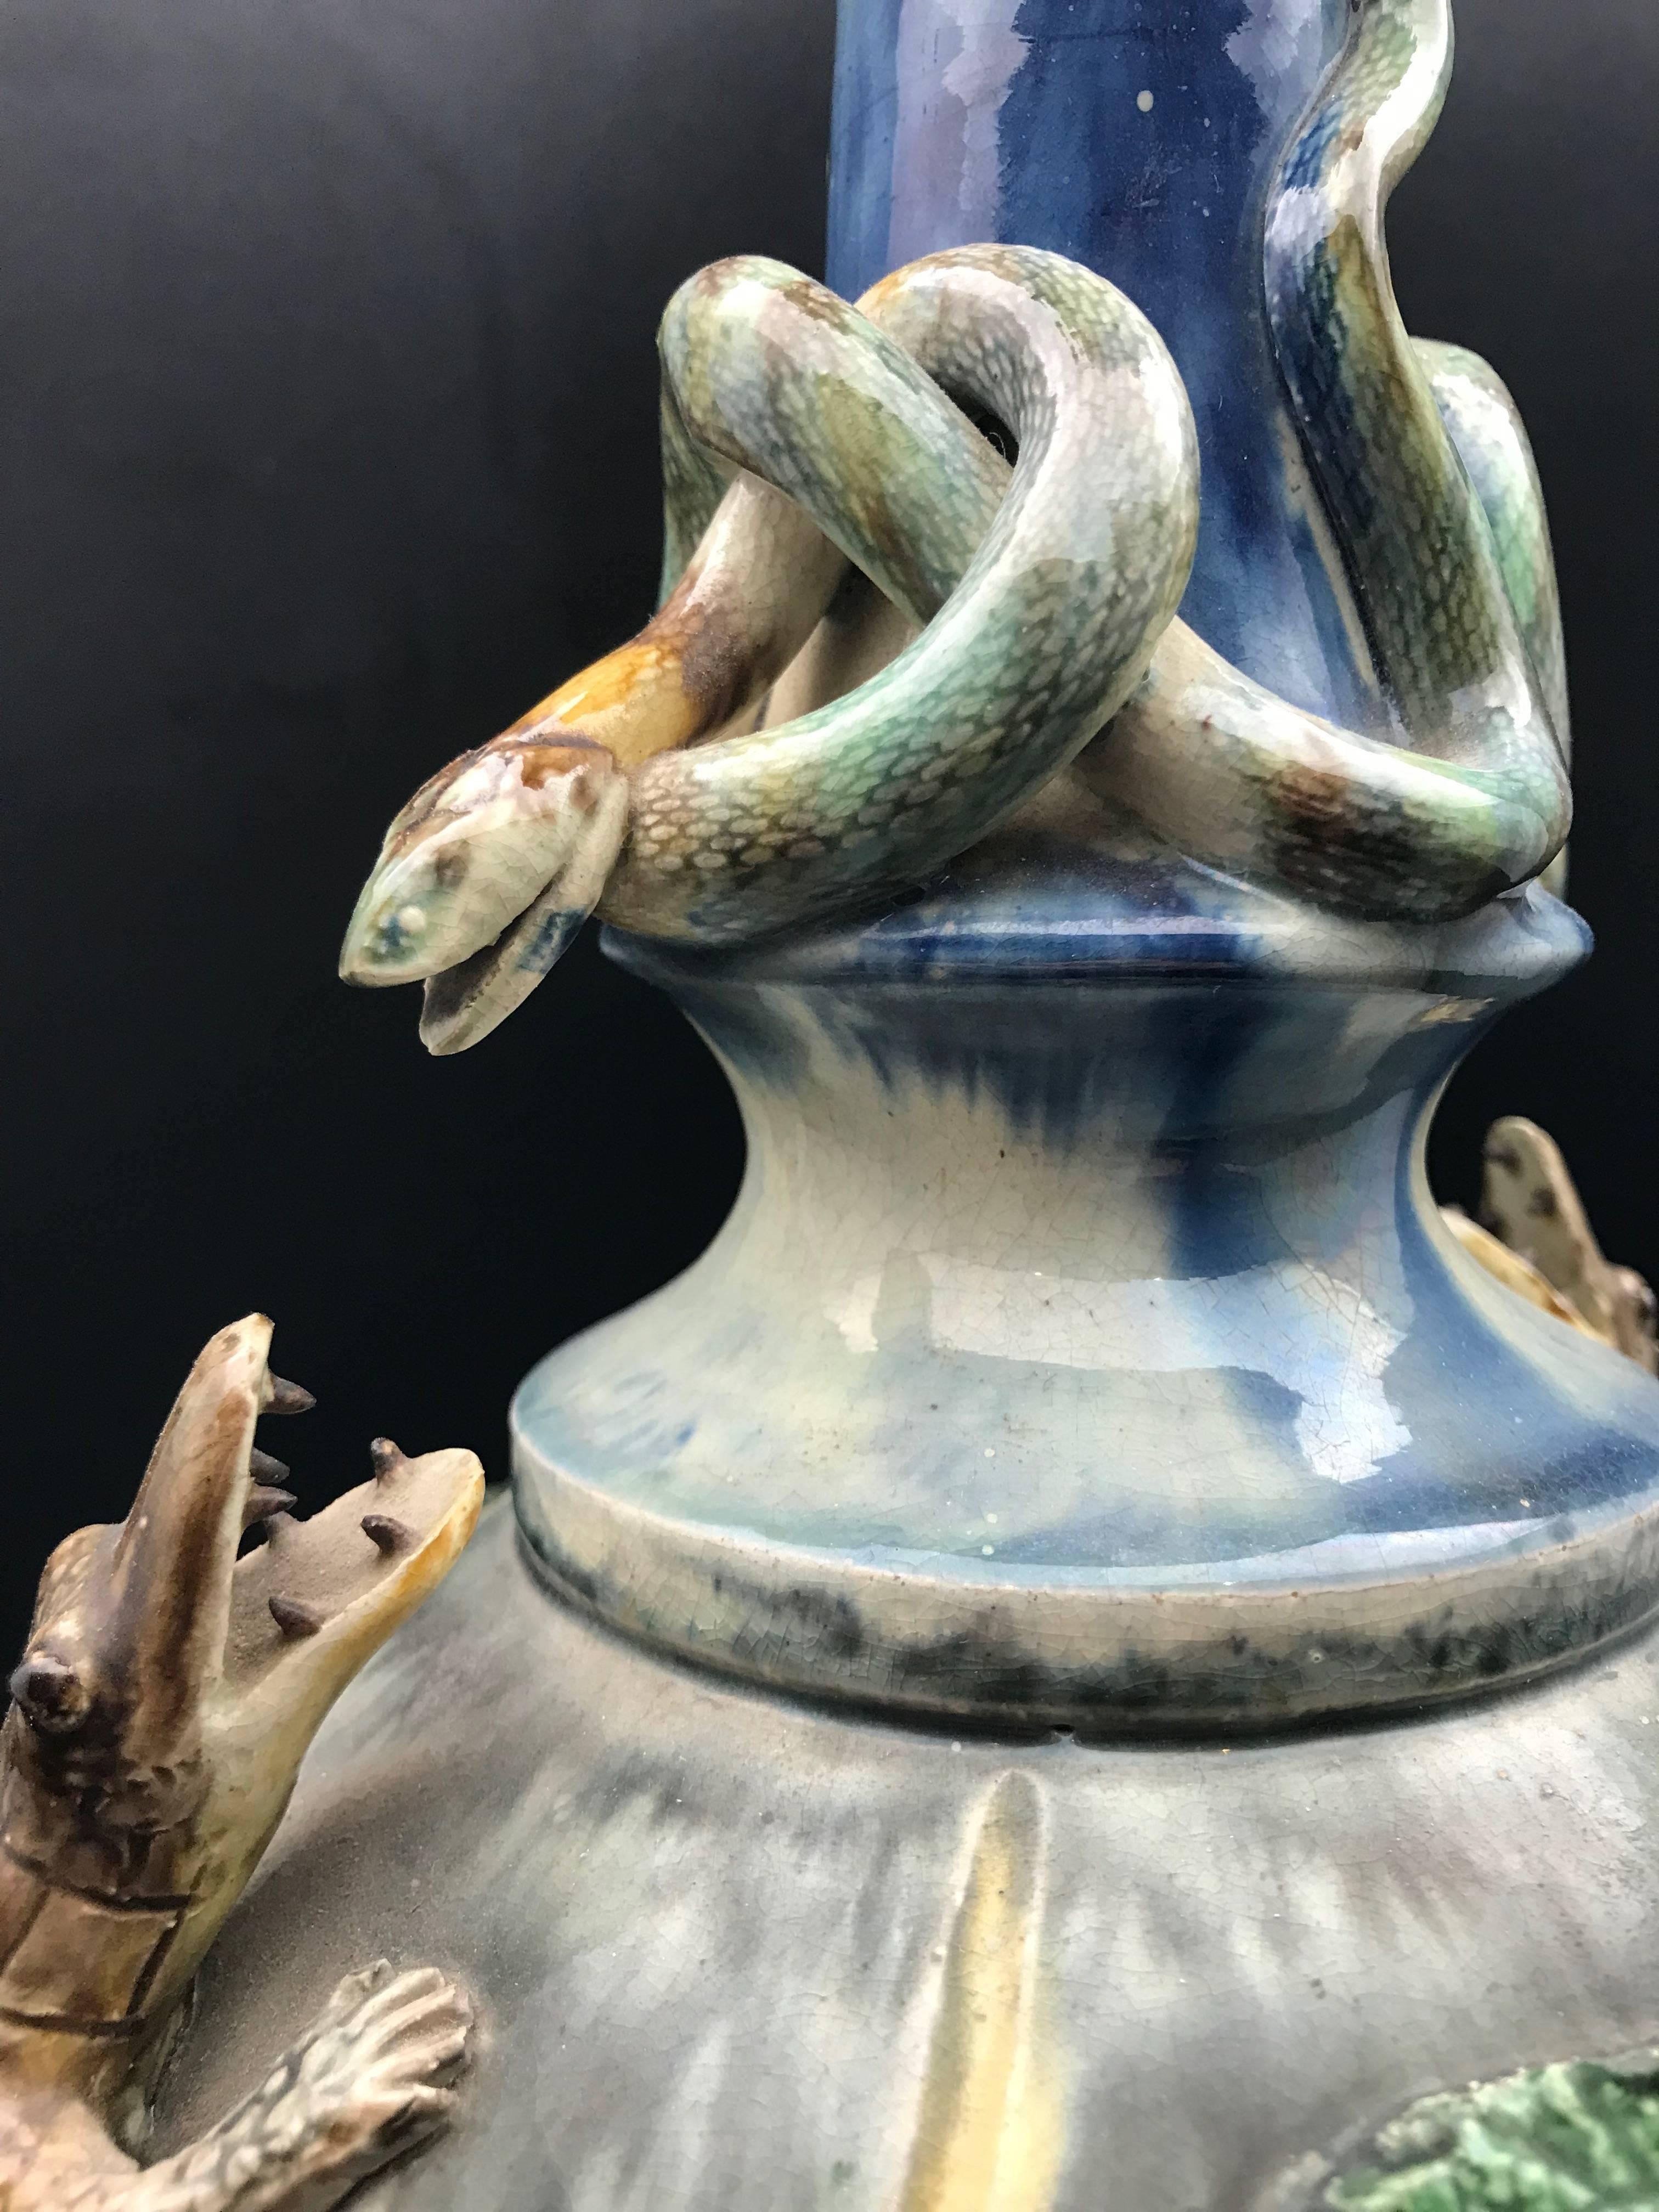 Late 19th Century Majolica Palissy Vase with Snake, Alligator Frog and Bee Decor 1